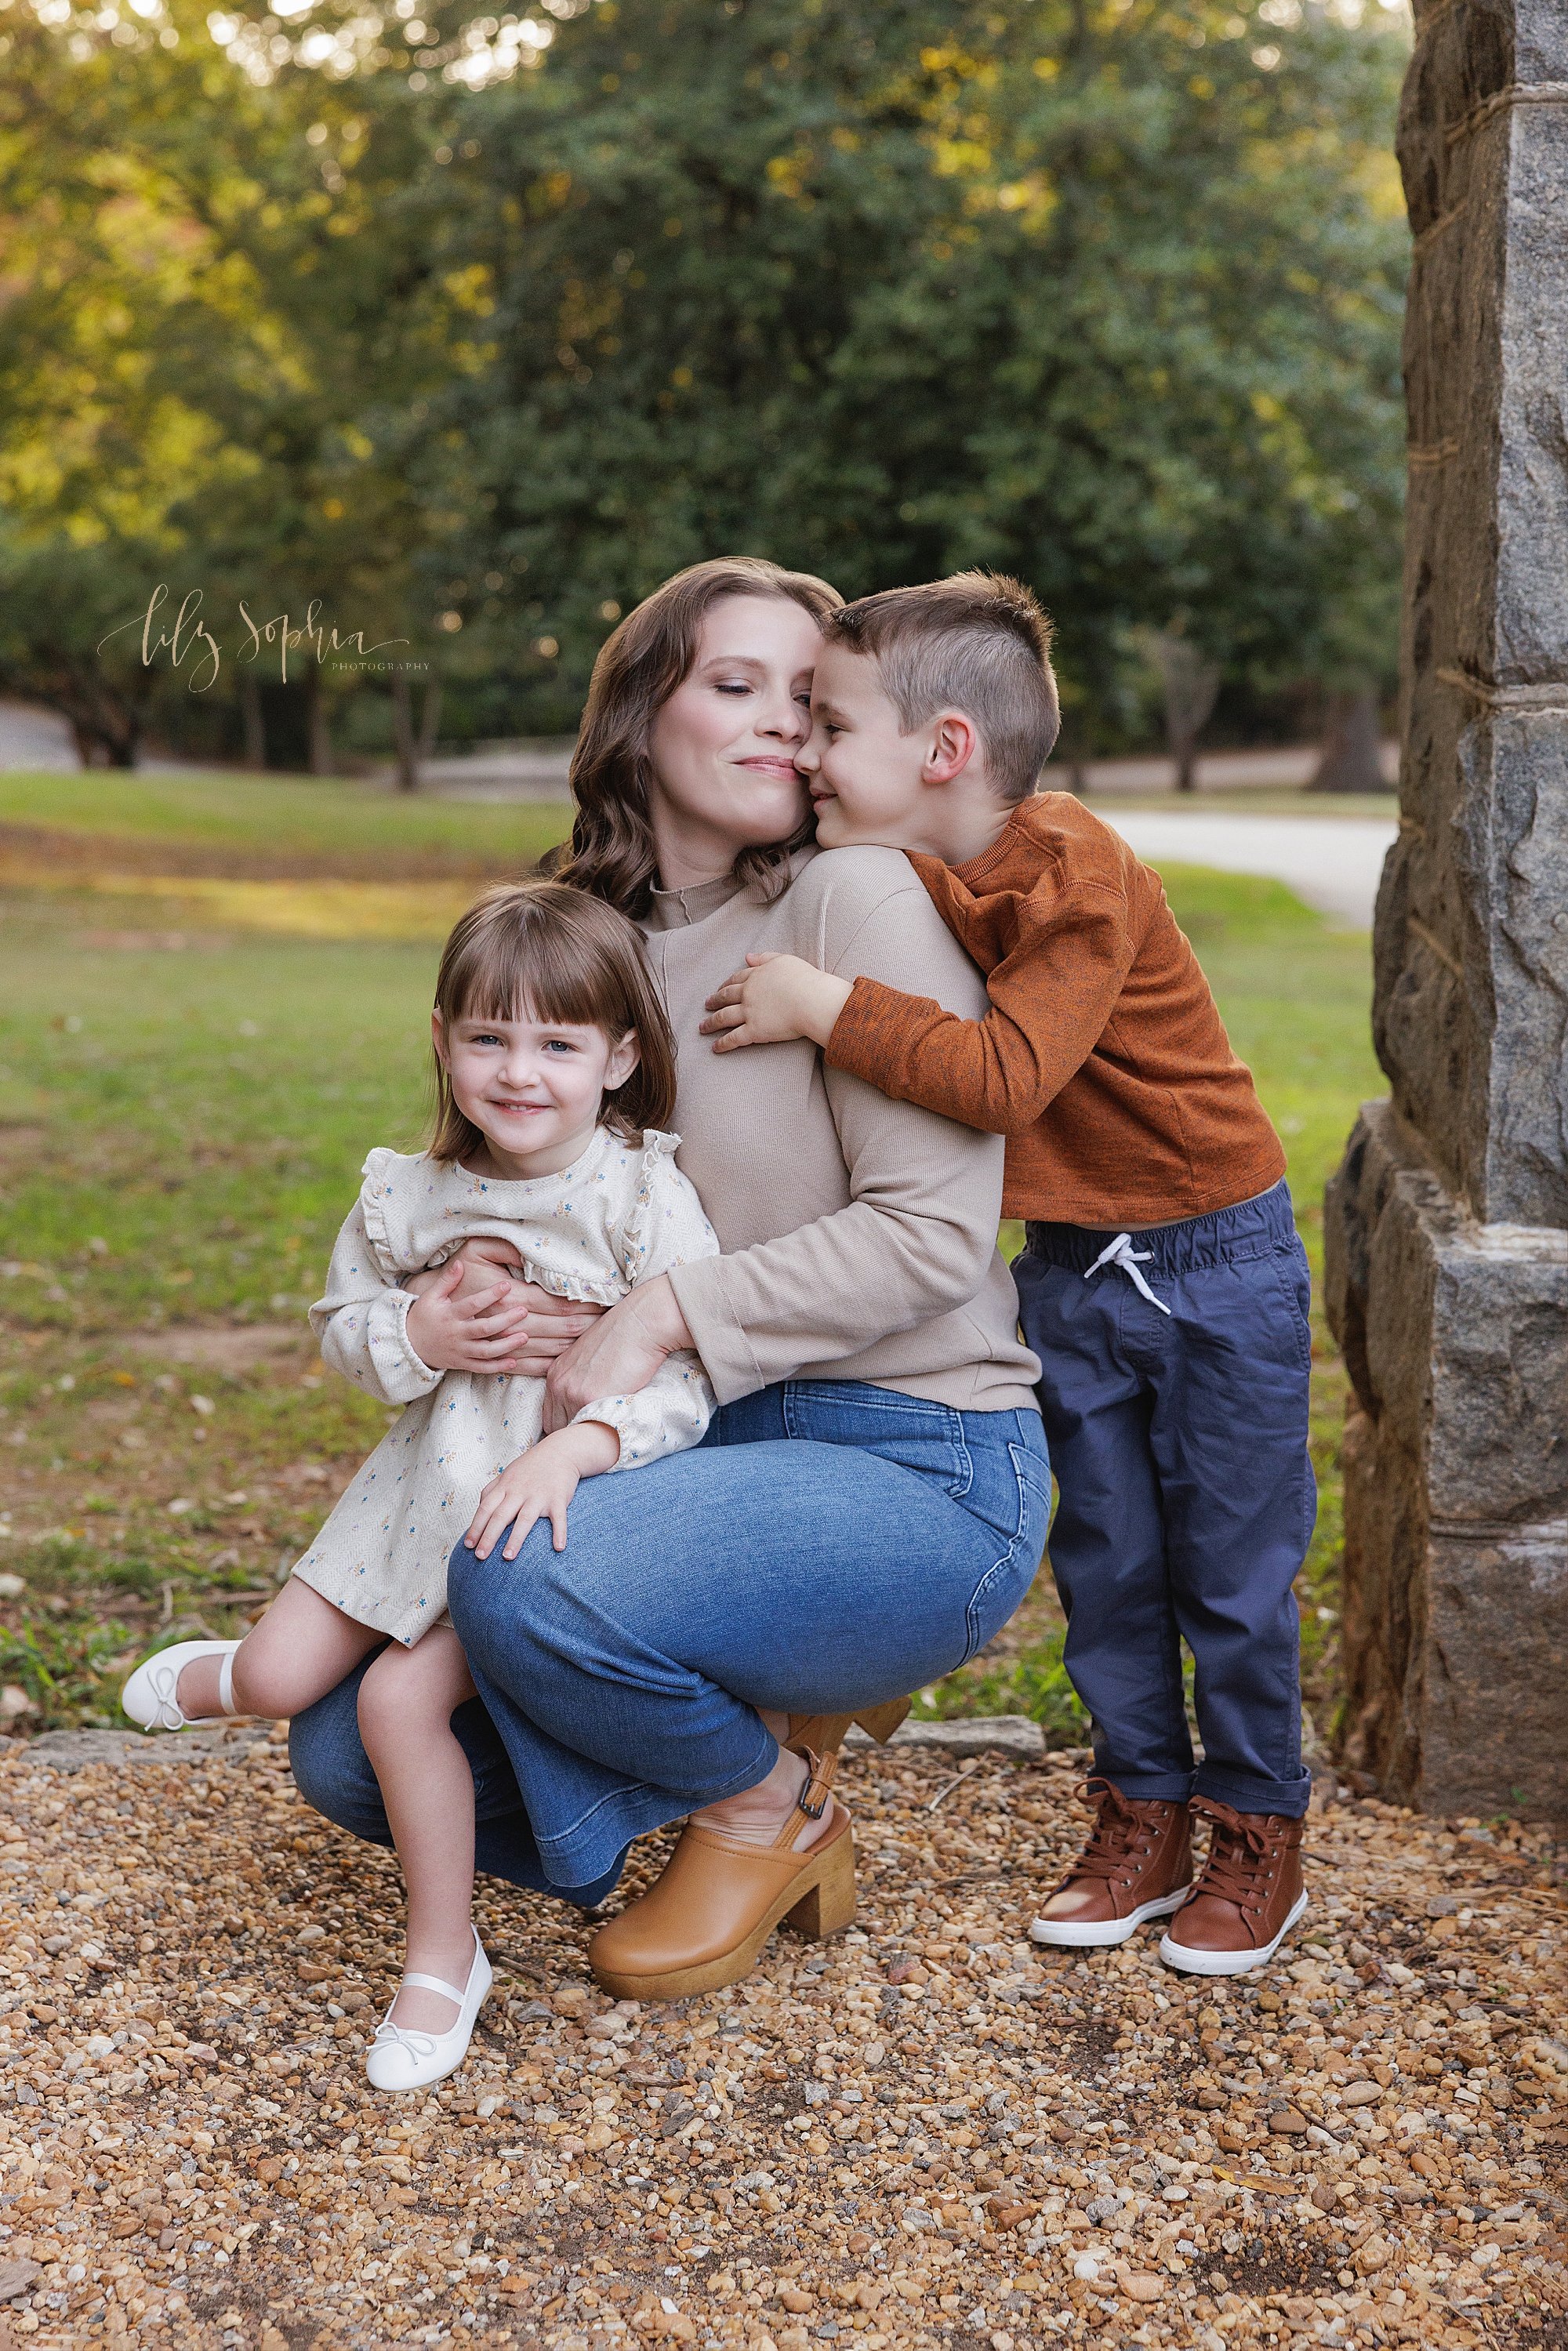 intown-atlanta-decatur-brookhaven-buckhead-outdoor-fall-pictures-family-photoshoot_5543.jpg